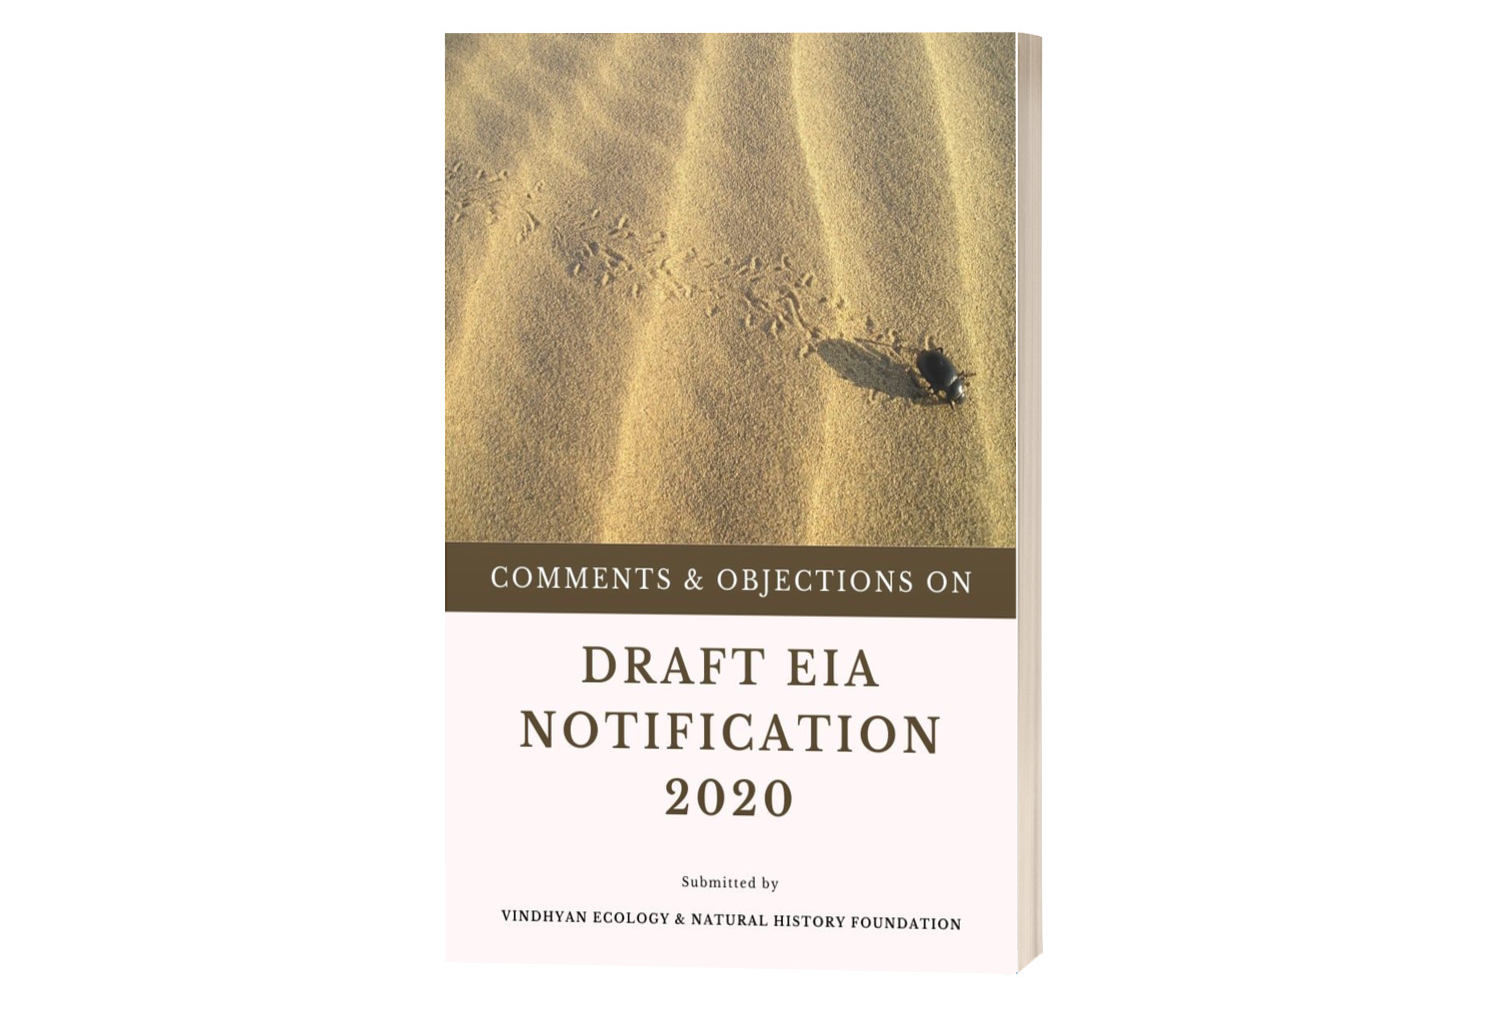 Download the full report- Comments & Objections on Draft EIA Notification 2020